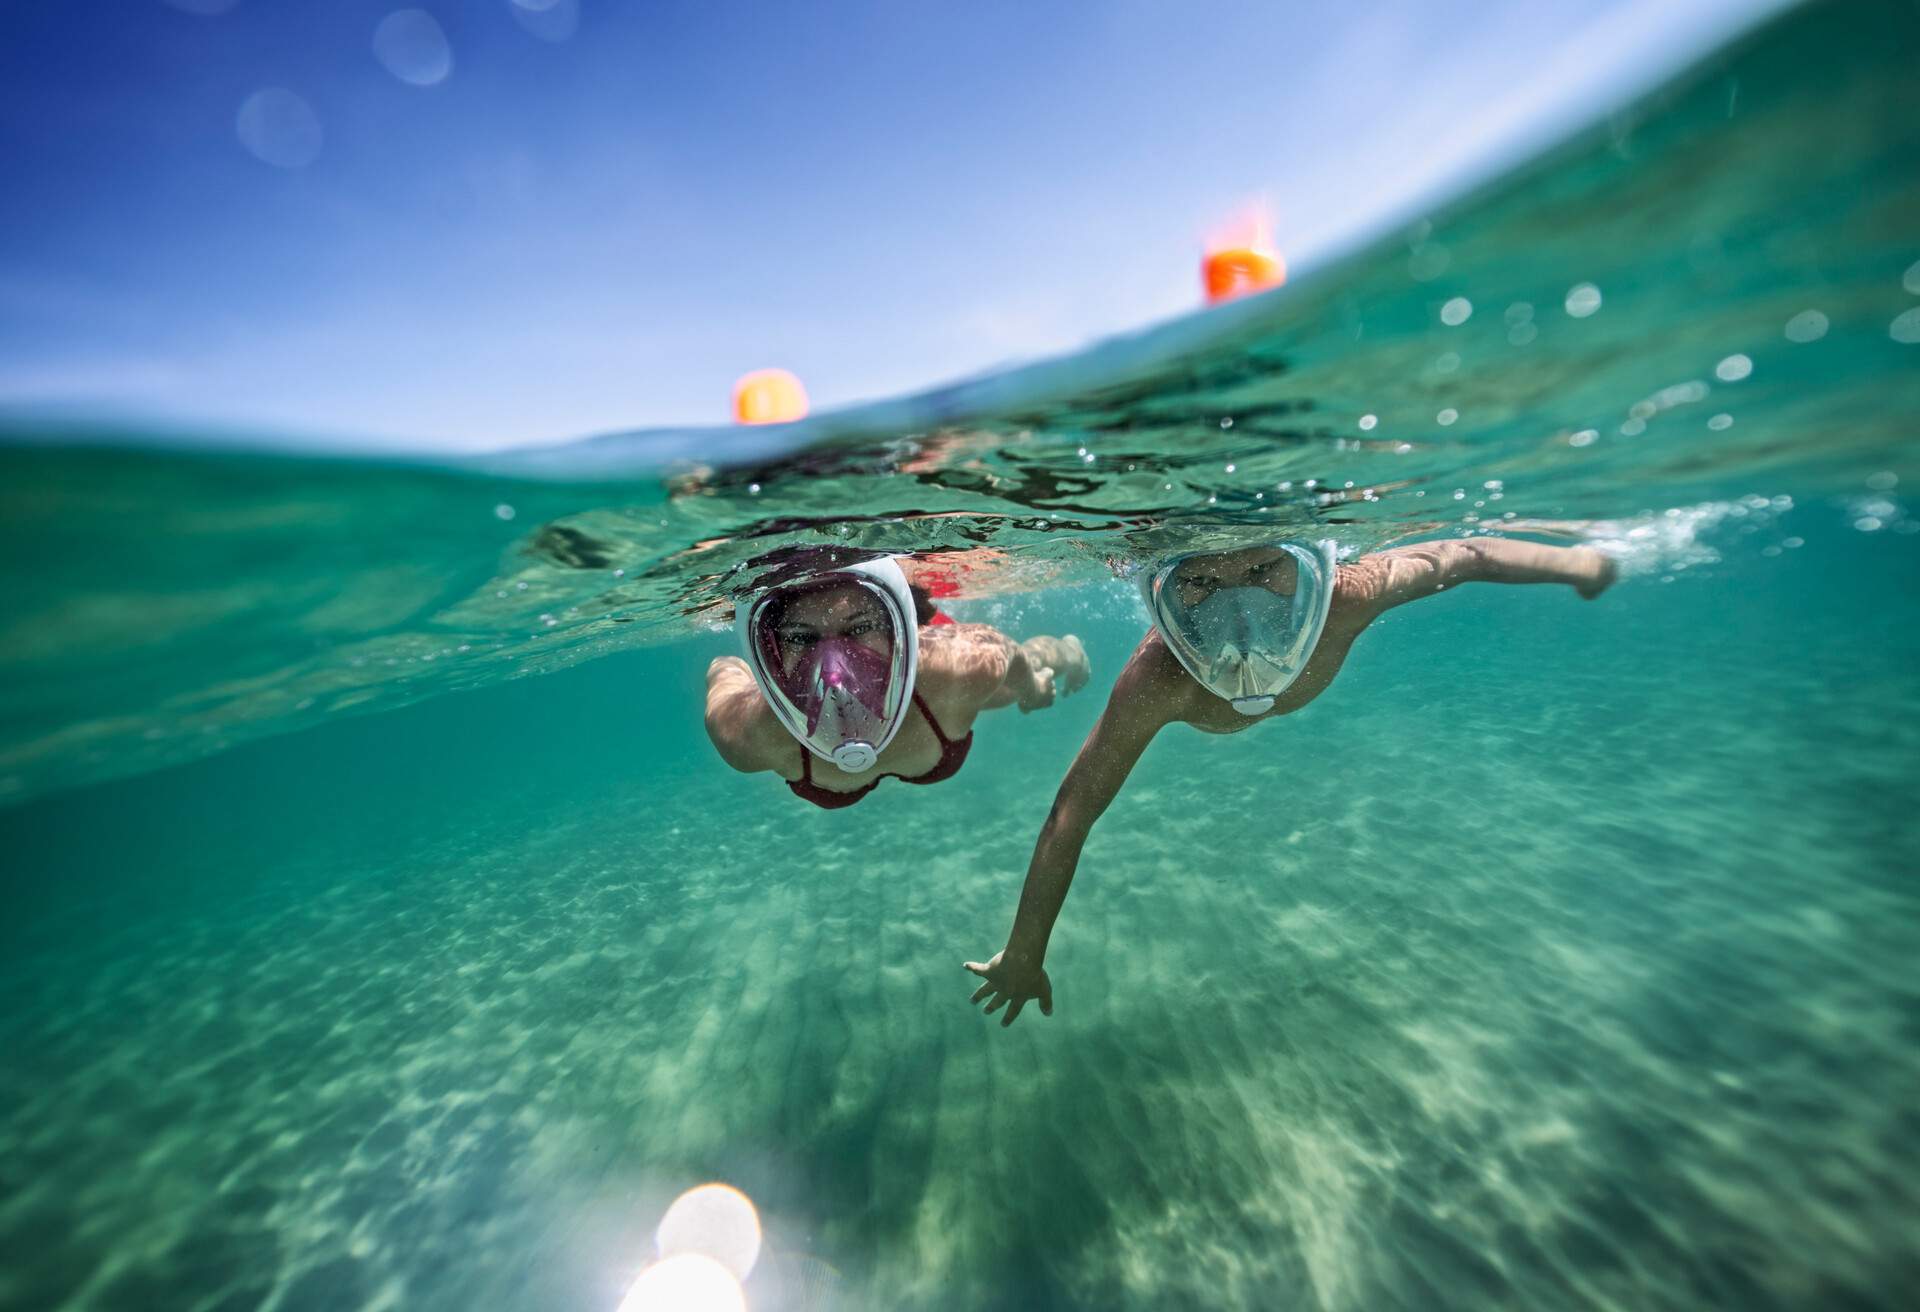 THEME_SNORKELLING_PEOPLE_CHILDREN_KIDS_FUL_GOGGLES_GettyImages-1127479680